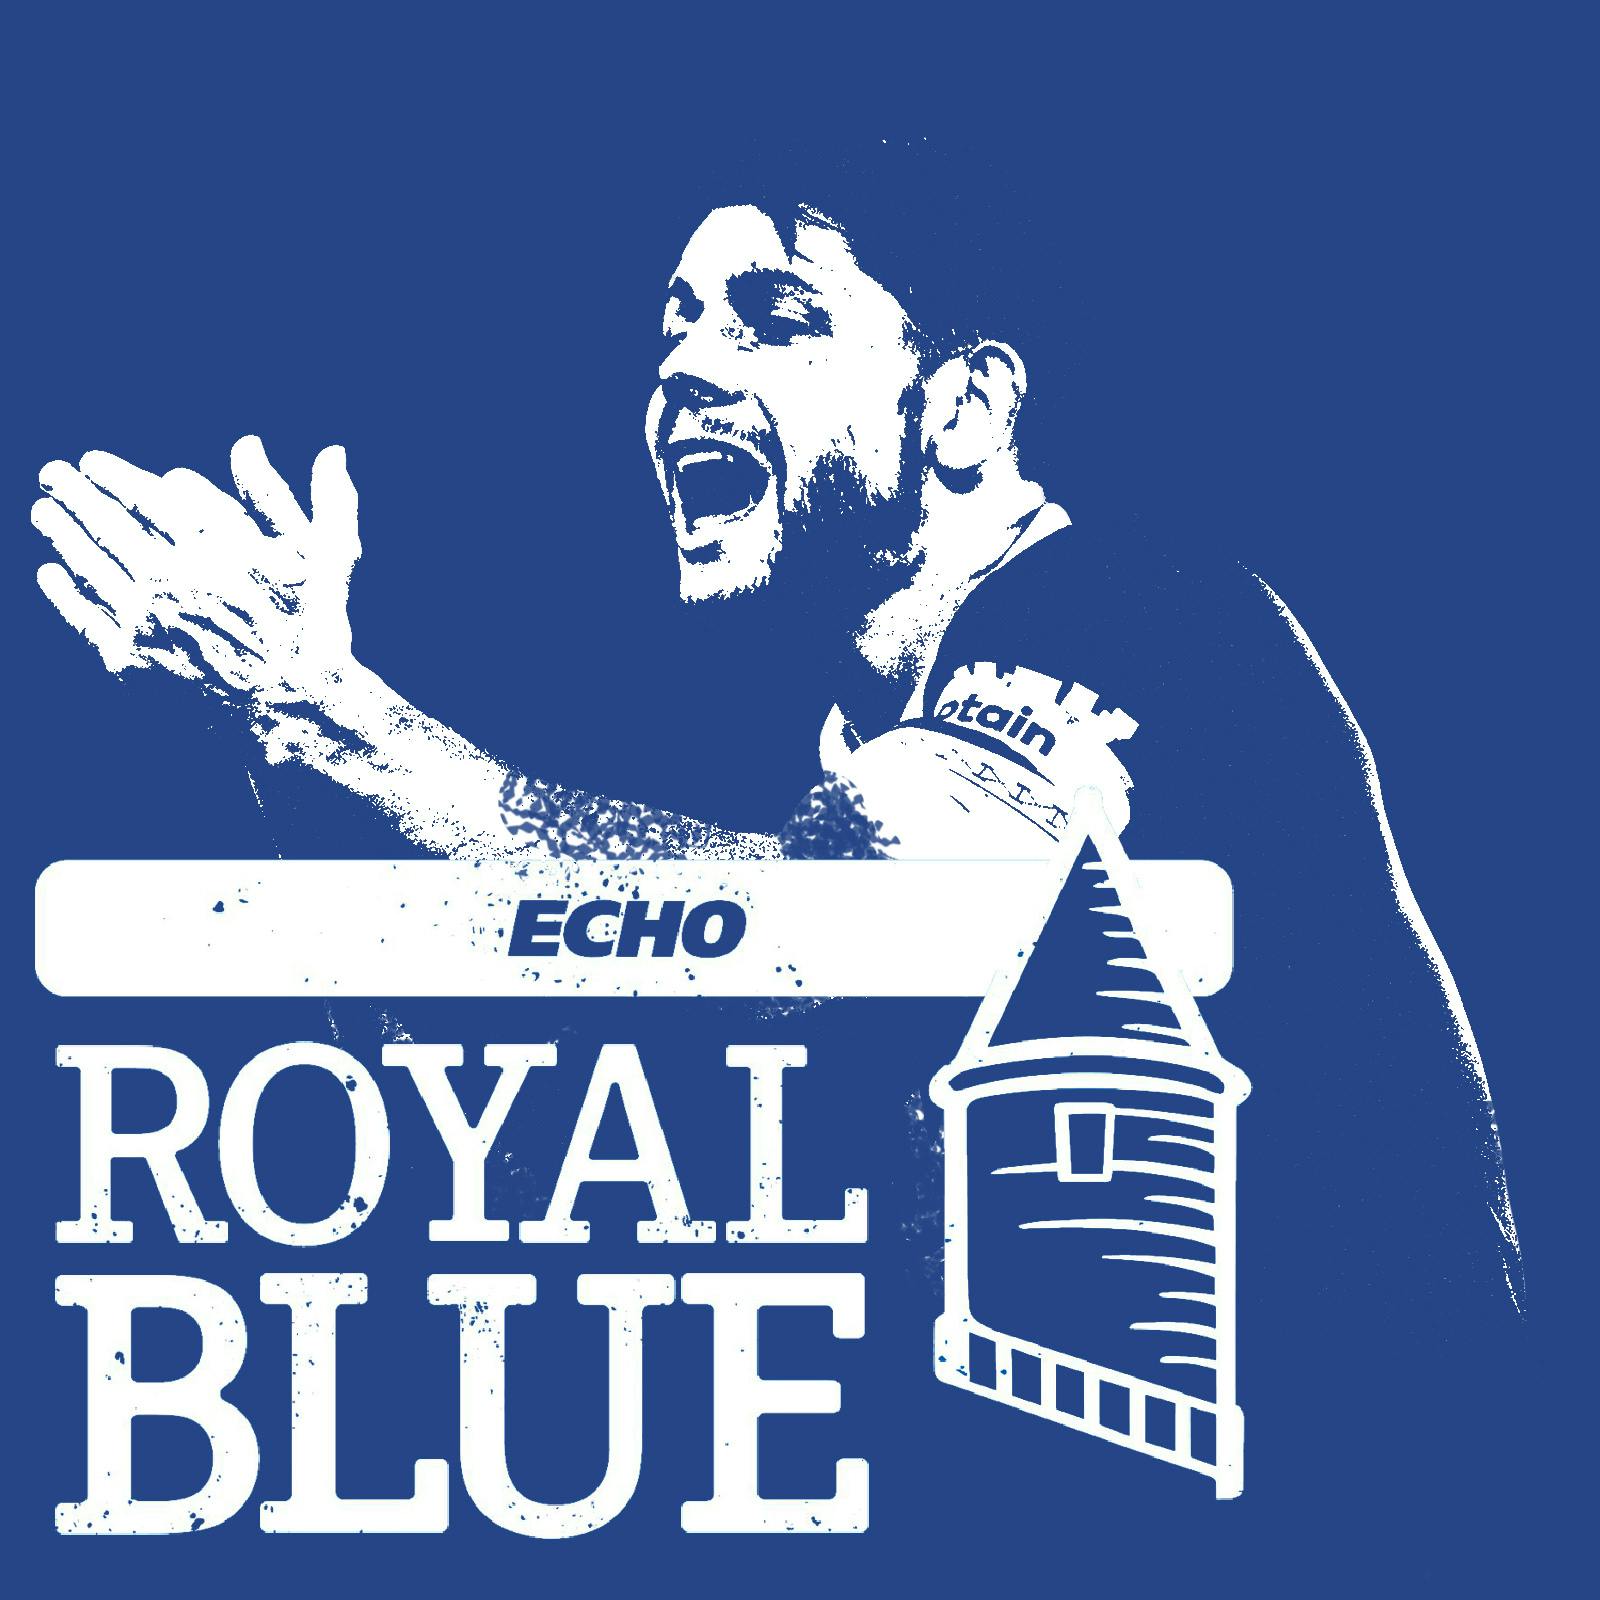 Royal Blue: How will the players react?